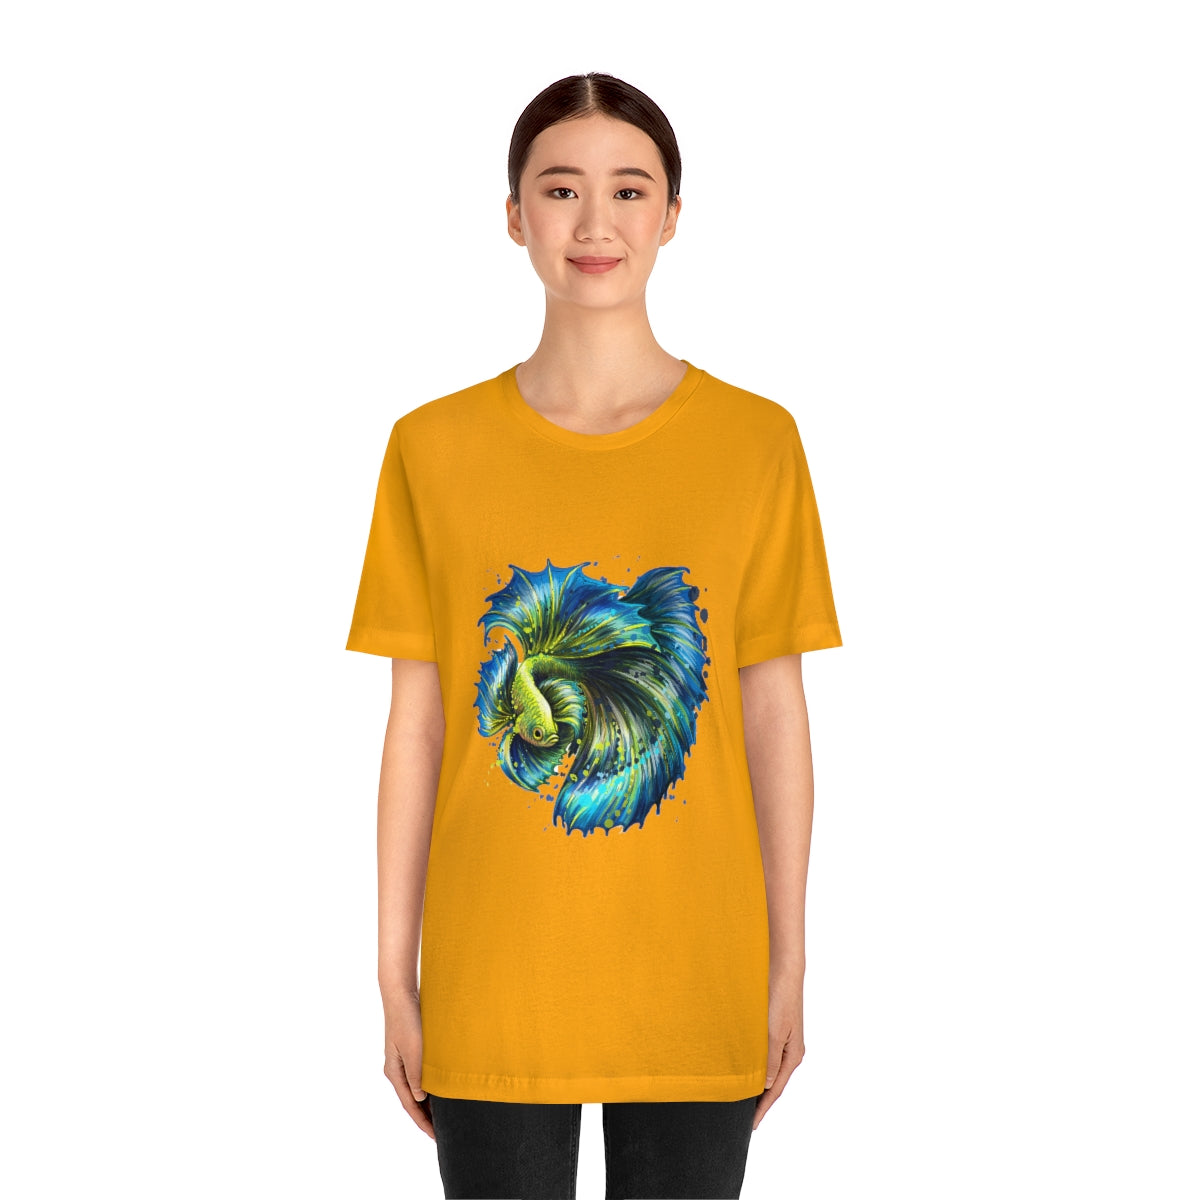 Unisex Jersey Short Sleeve Tee "Colorful tropical fish"